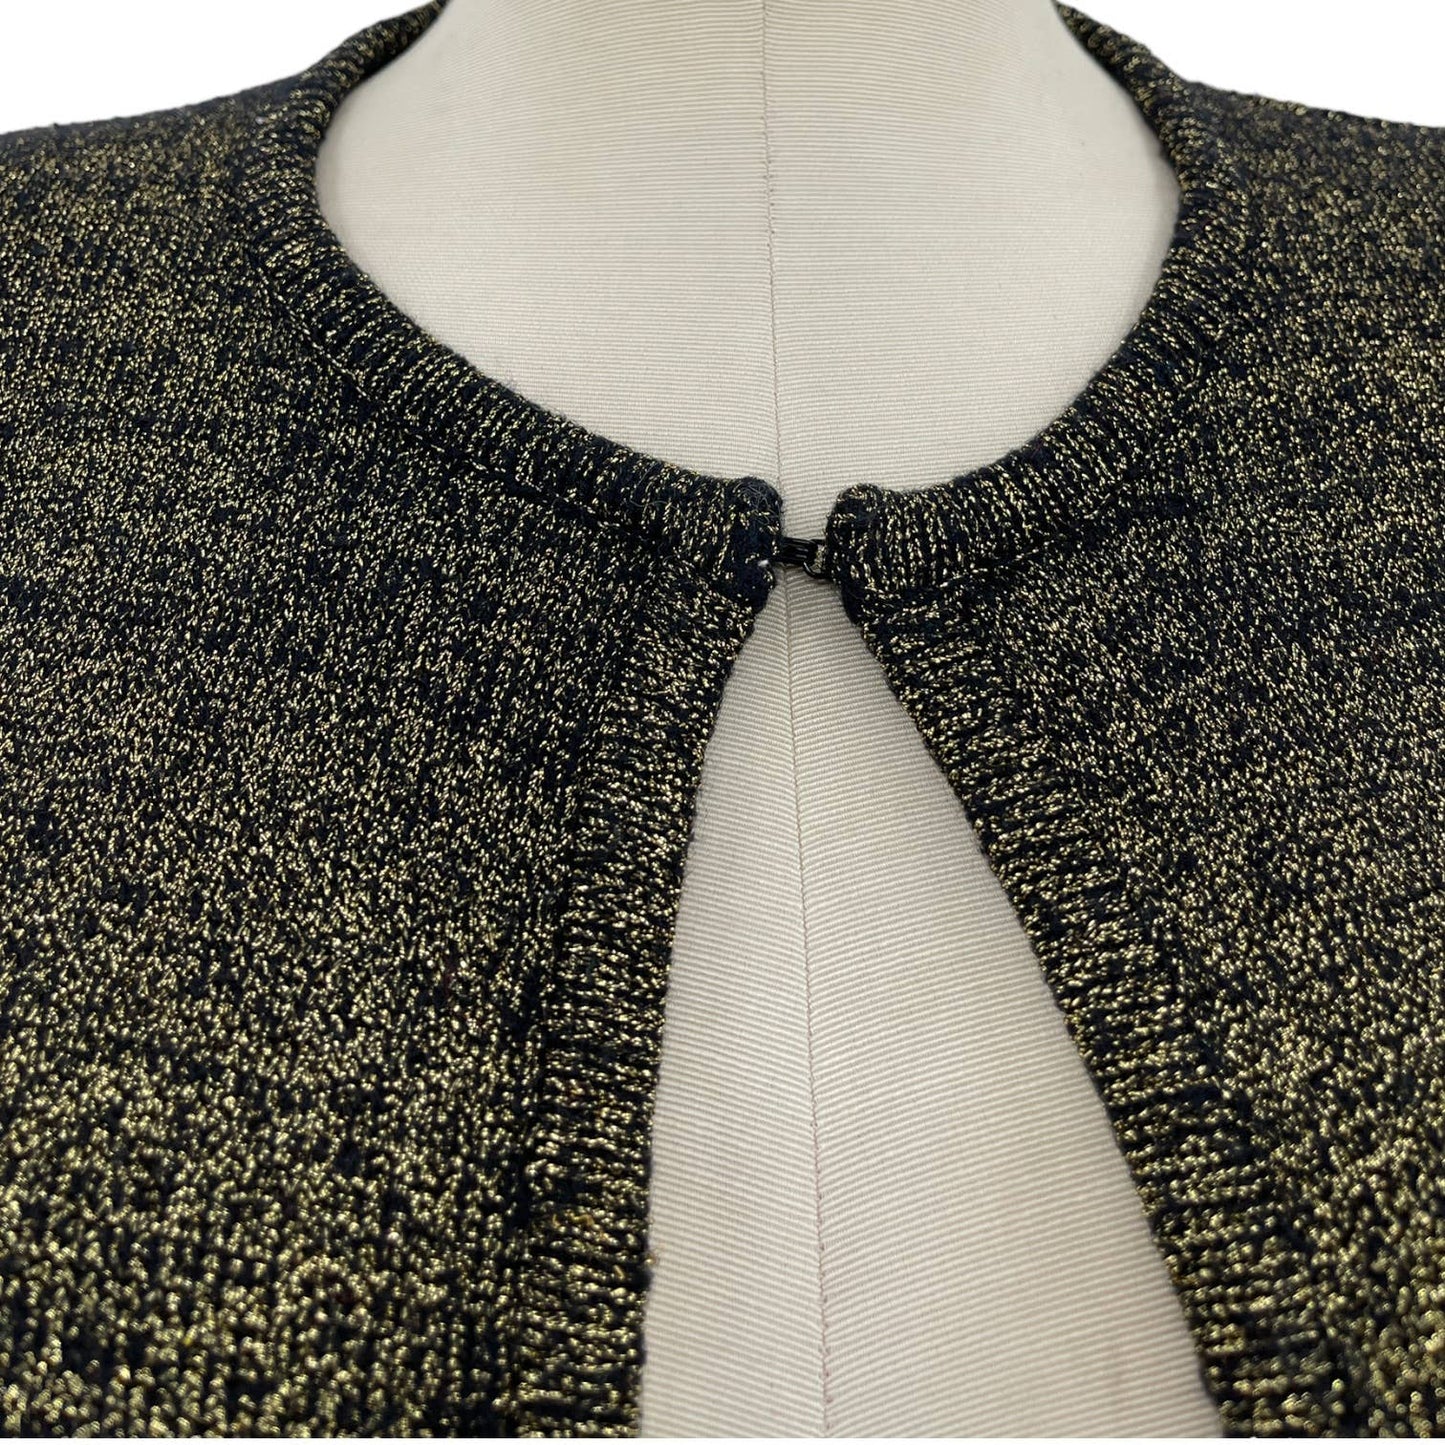 Vintage 90s Black and Gold Open Front Cardigan Sweater Pockets IB Diffusion M